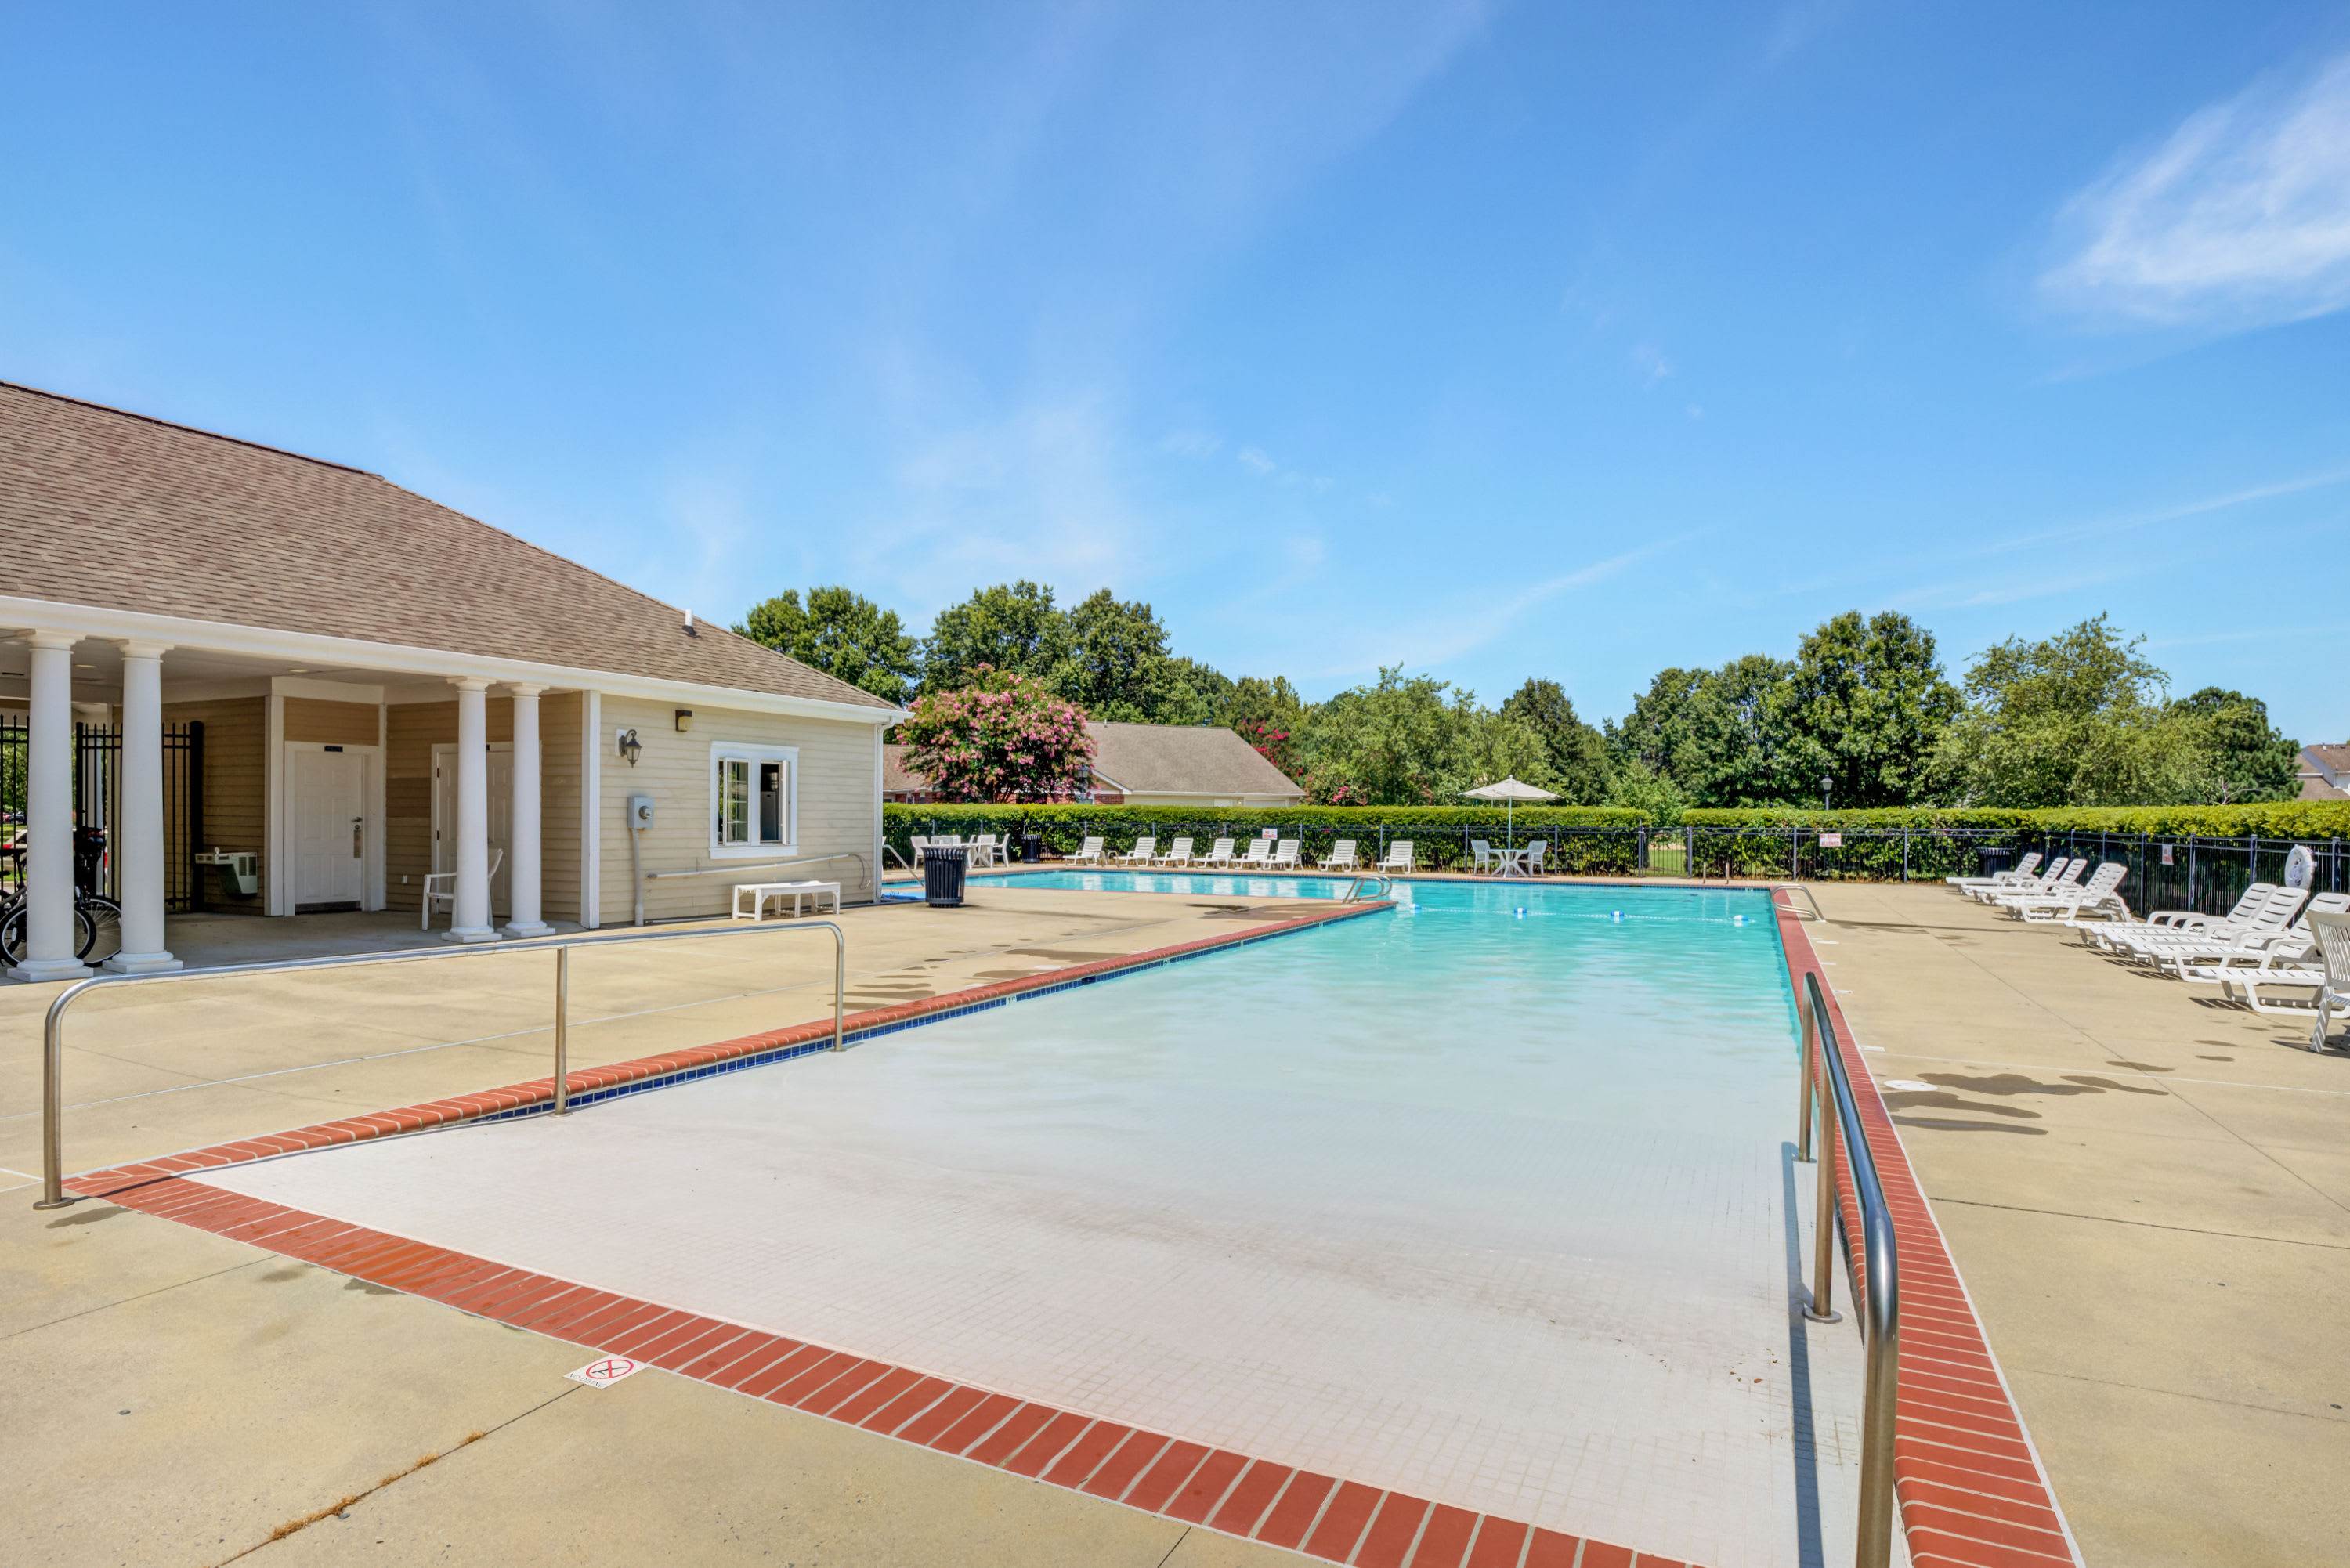 The community swimming pool at Midway Manor in Virgina Beach, Virginia